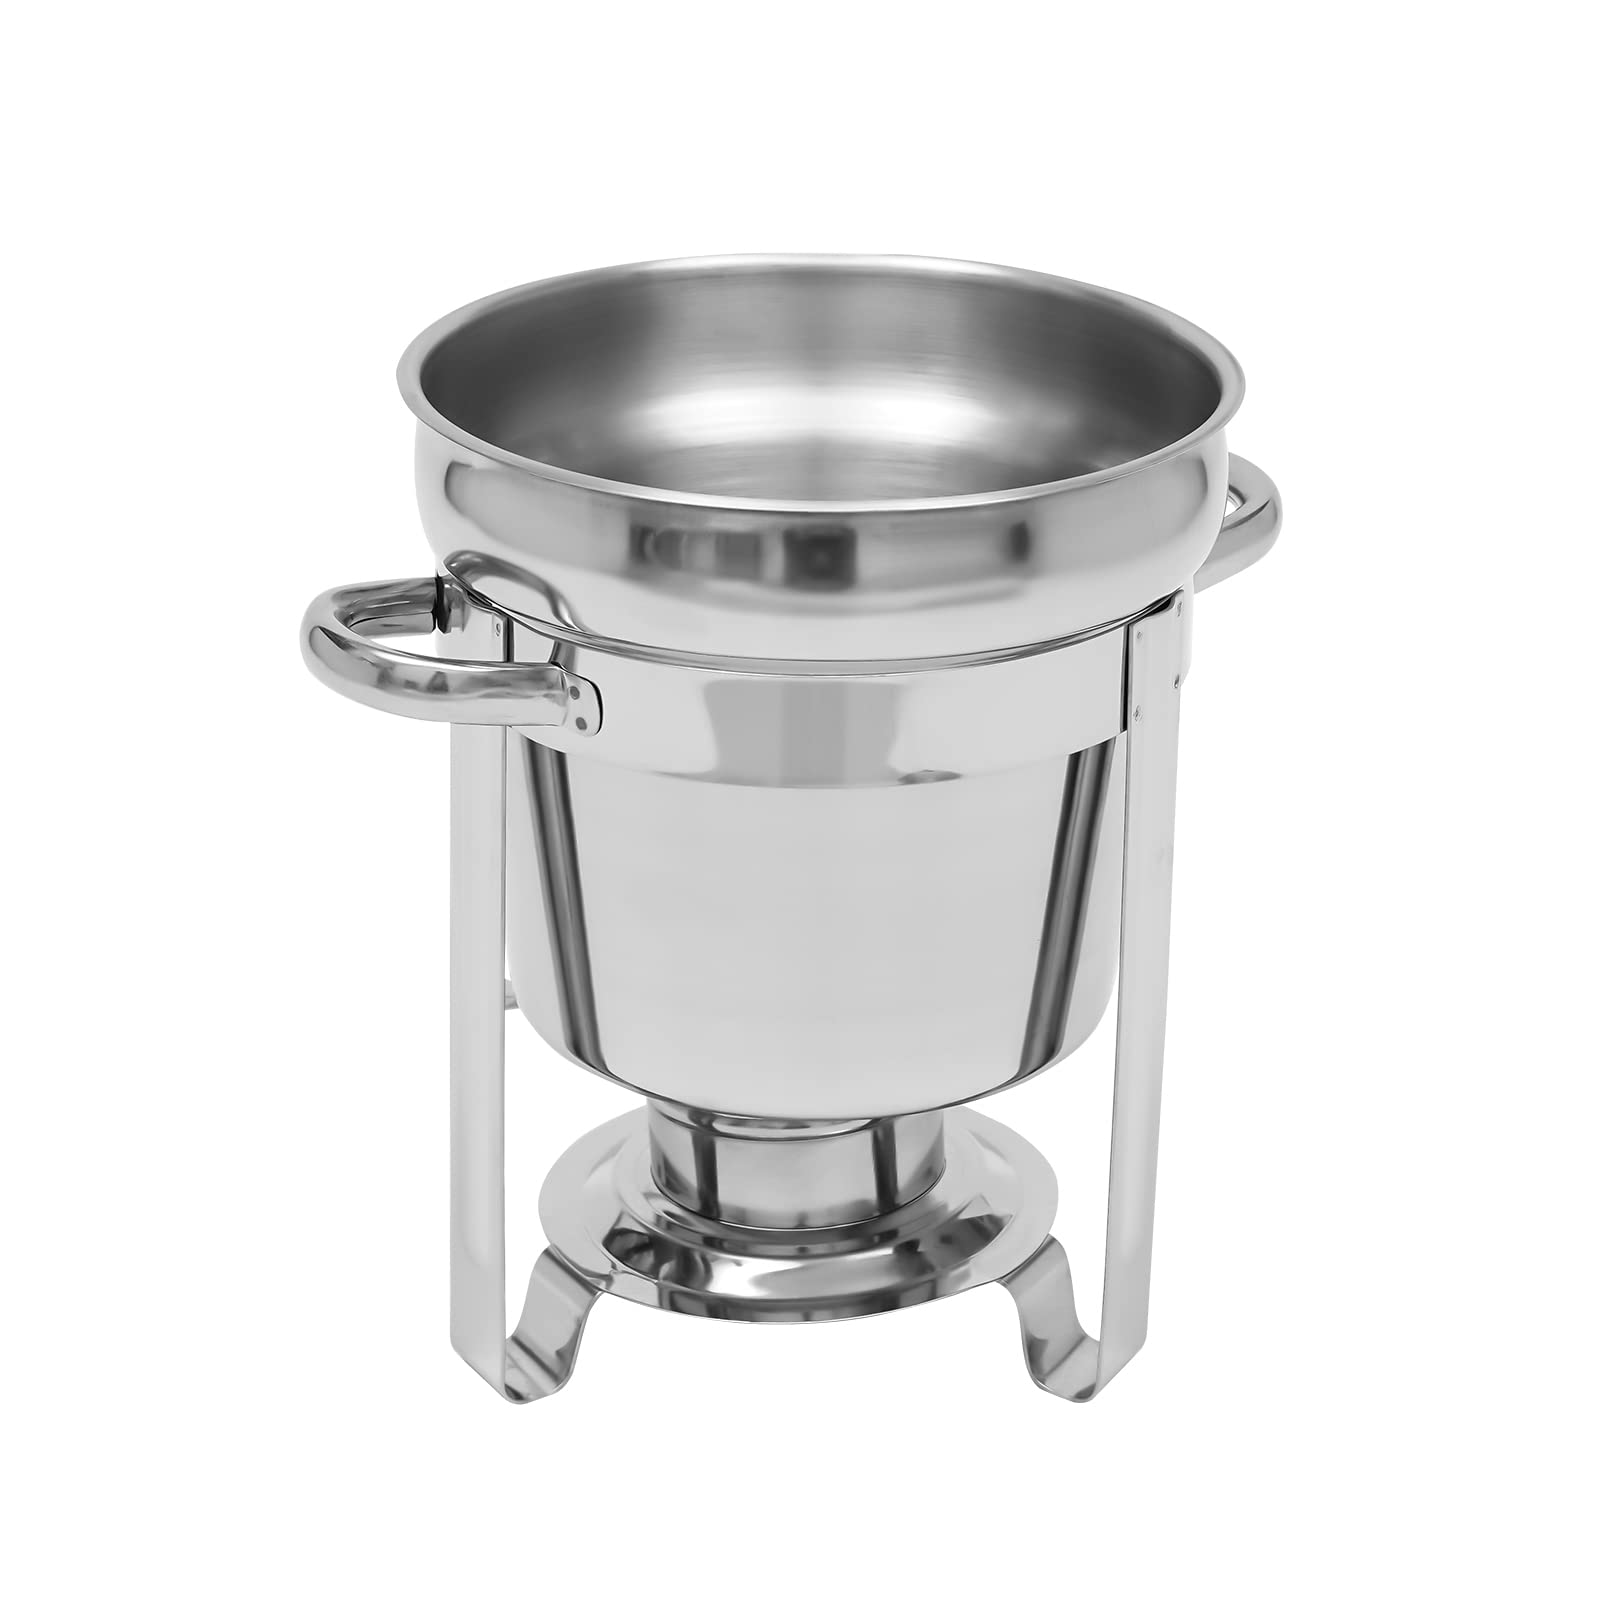 Soup Warmer,7.4 Qt. Soup Catering Supplies Food Warmer,Chafing Dish Buffet Set, Food Warmers for Parties